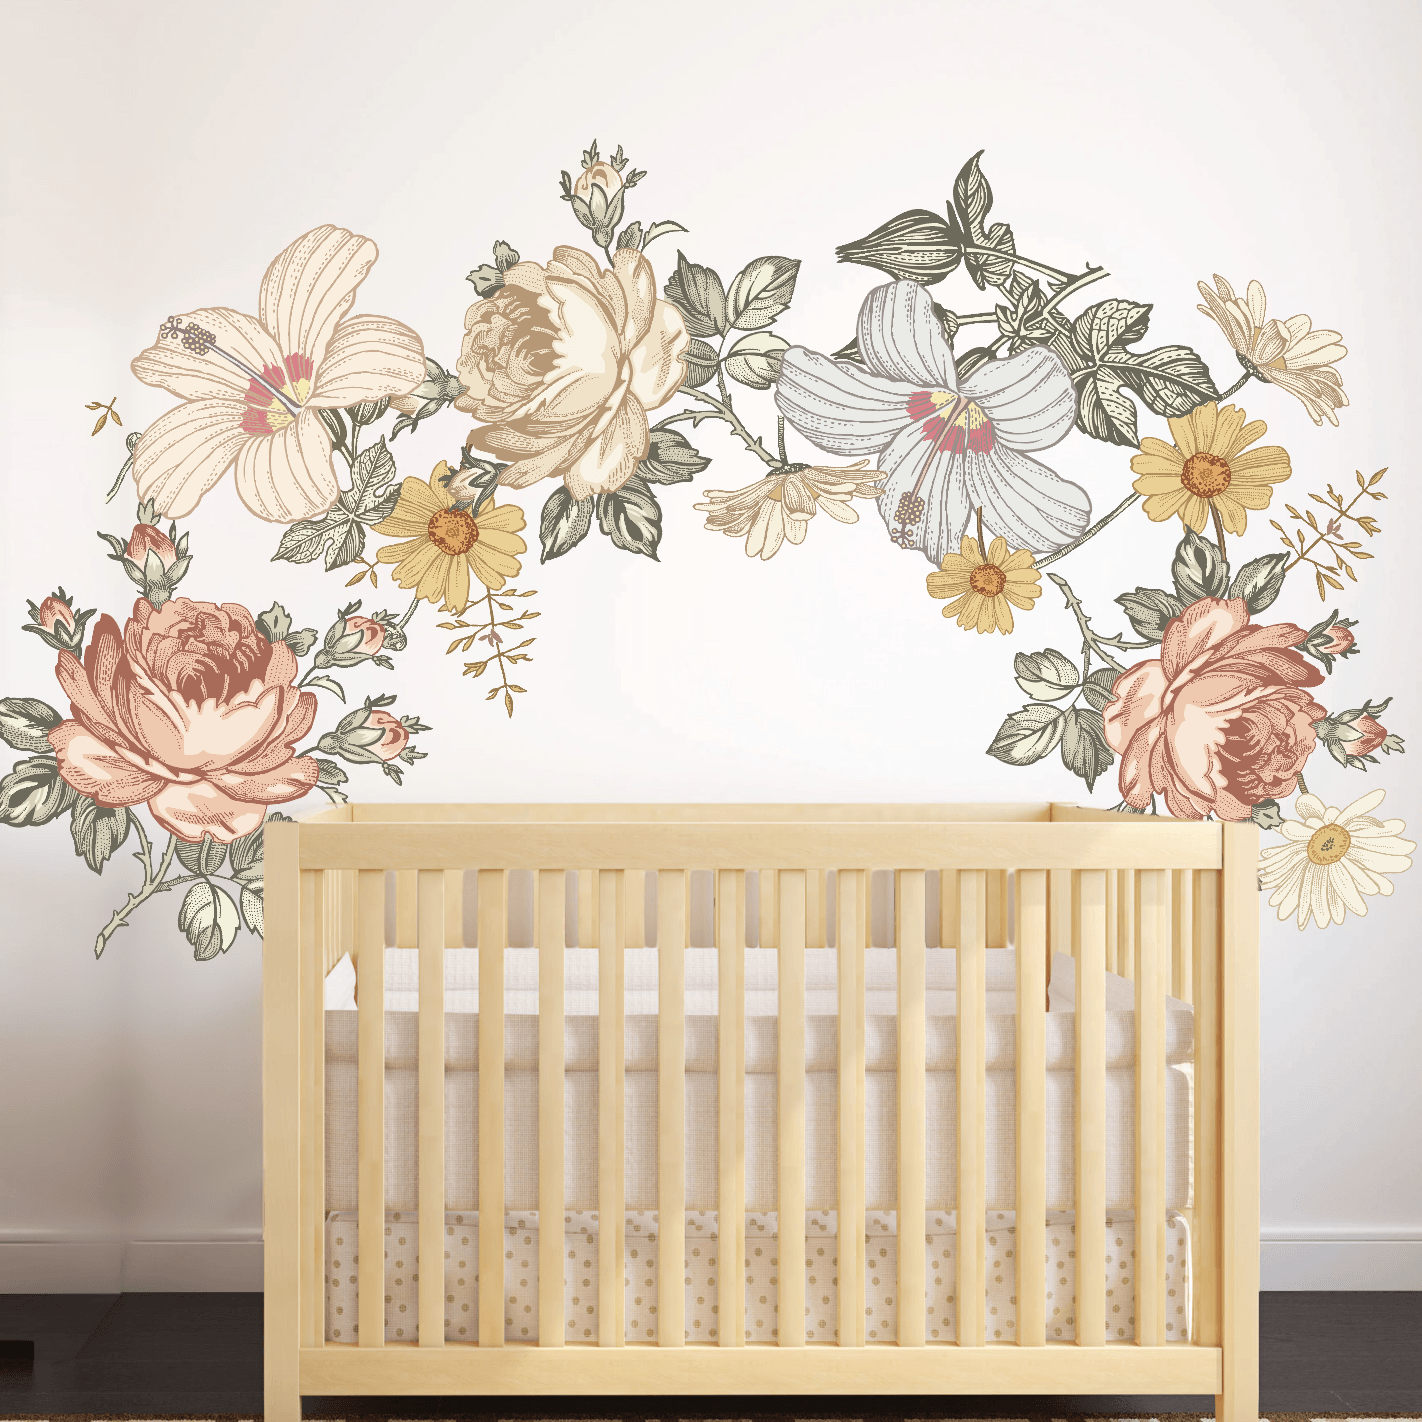 Wall Decals, Flower Wall Decals, Nursery Decor, Wall Decals for Kids, Floral Decals, Flower Wall Stickers, Floral Stickers